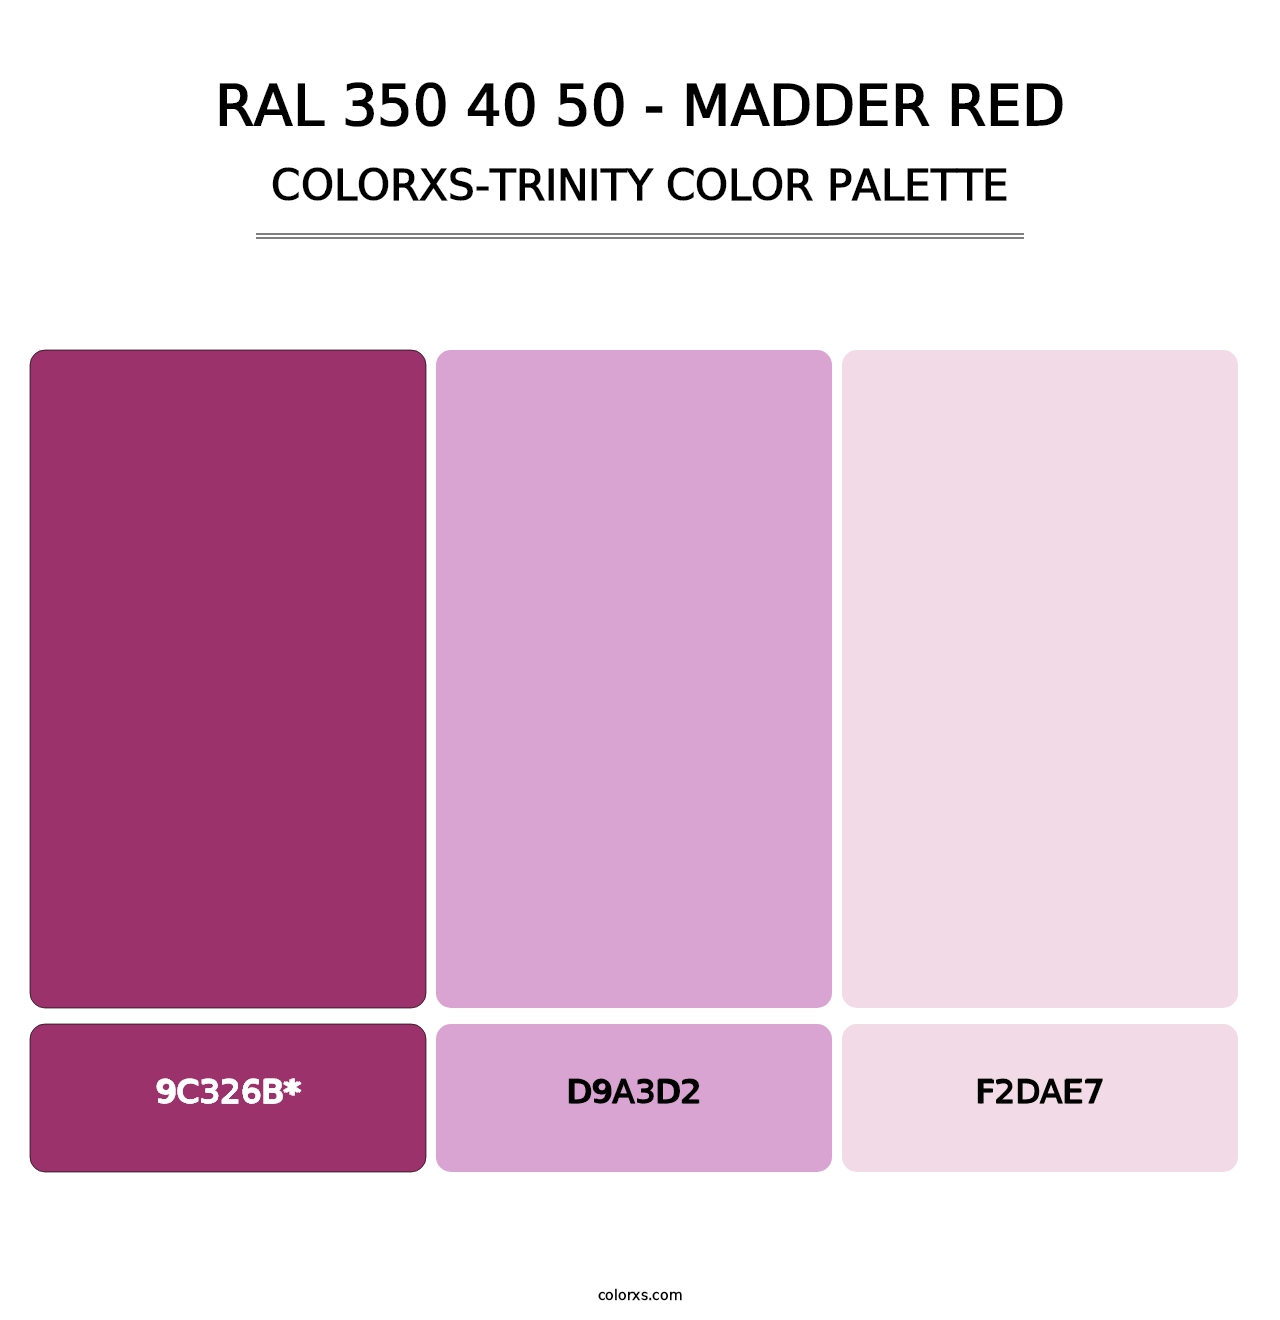 RAL 350 40 50 - Madder Red - Colorxs Trinity Palette